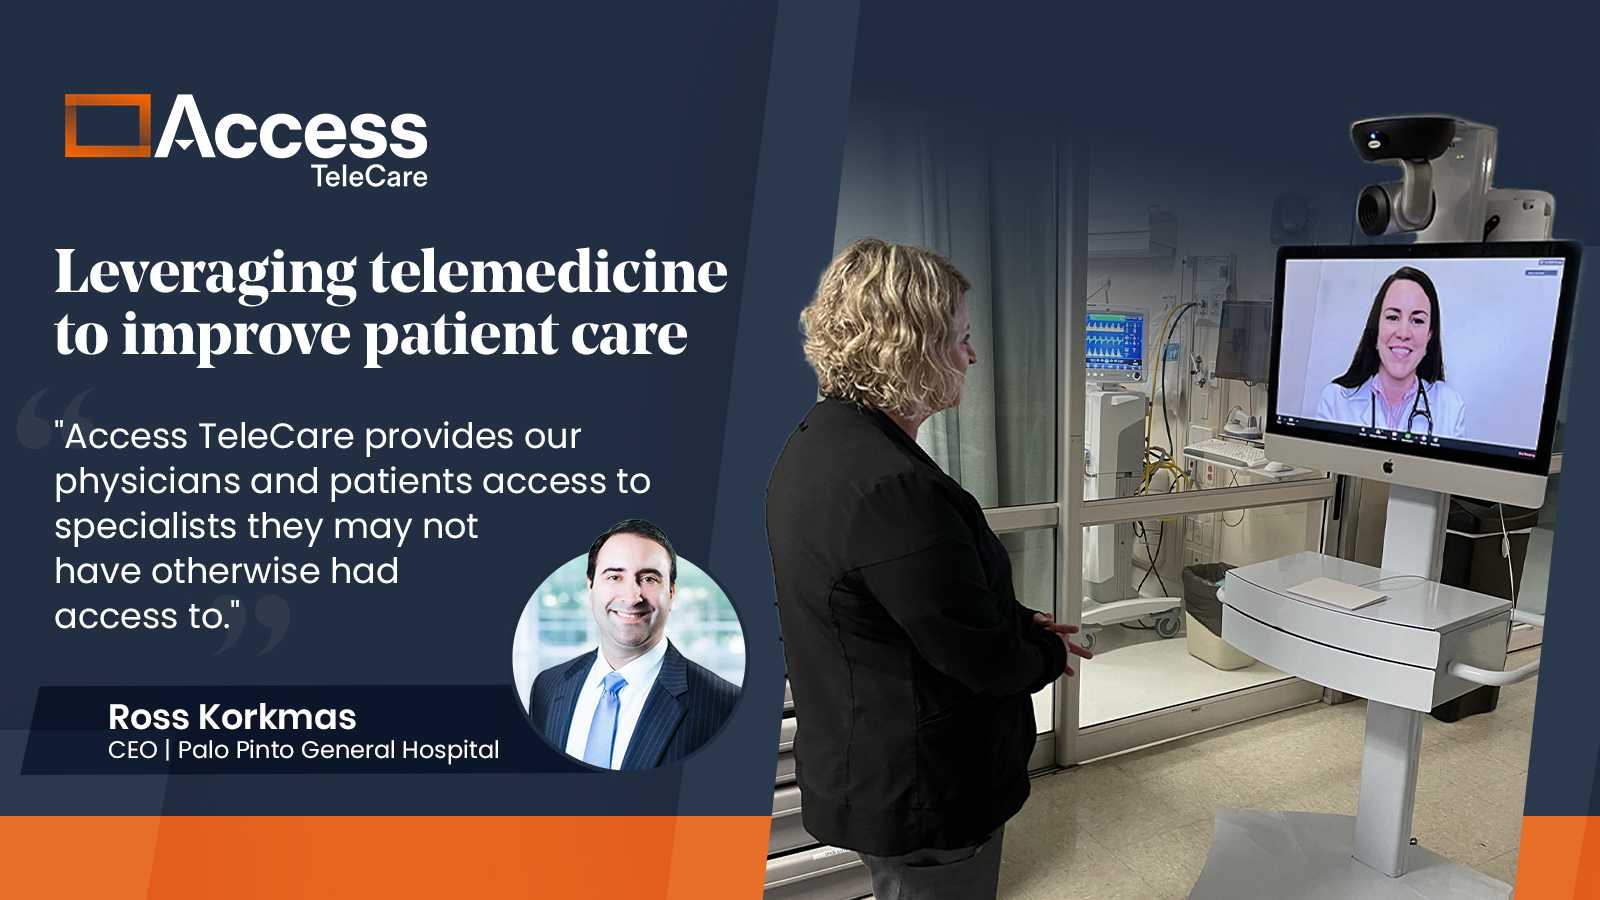 Quote from hospital CEO Ross Korkmas emphasizes improved patient care through Access TeleCare's telemedicine